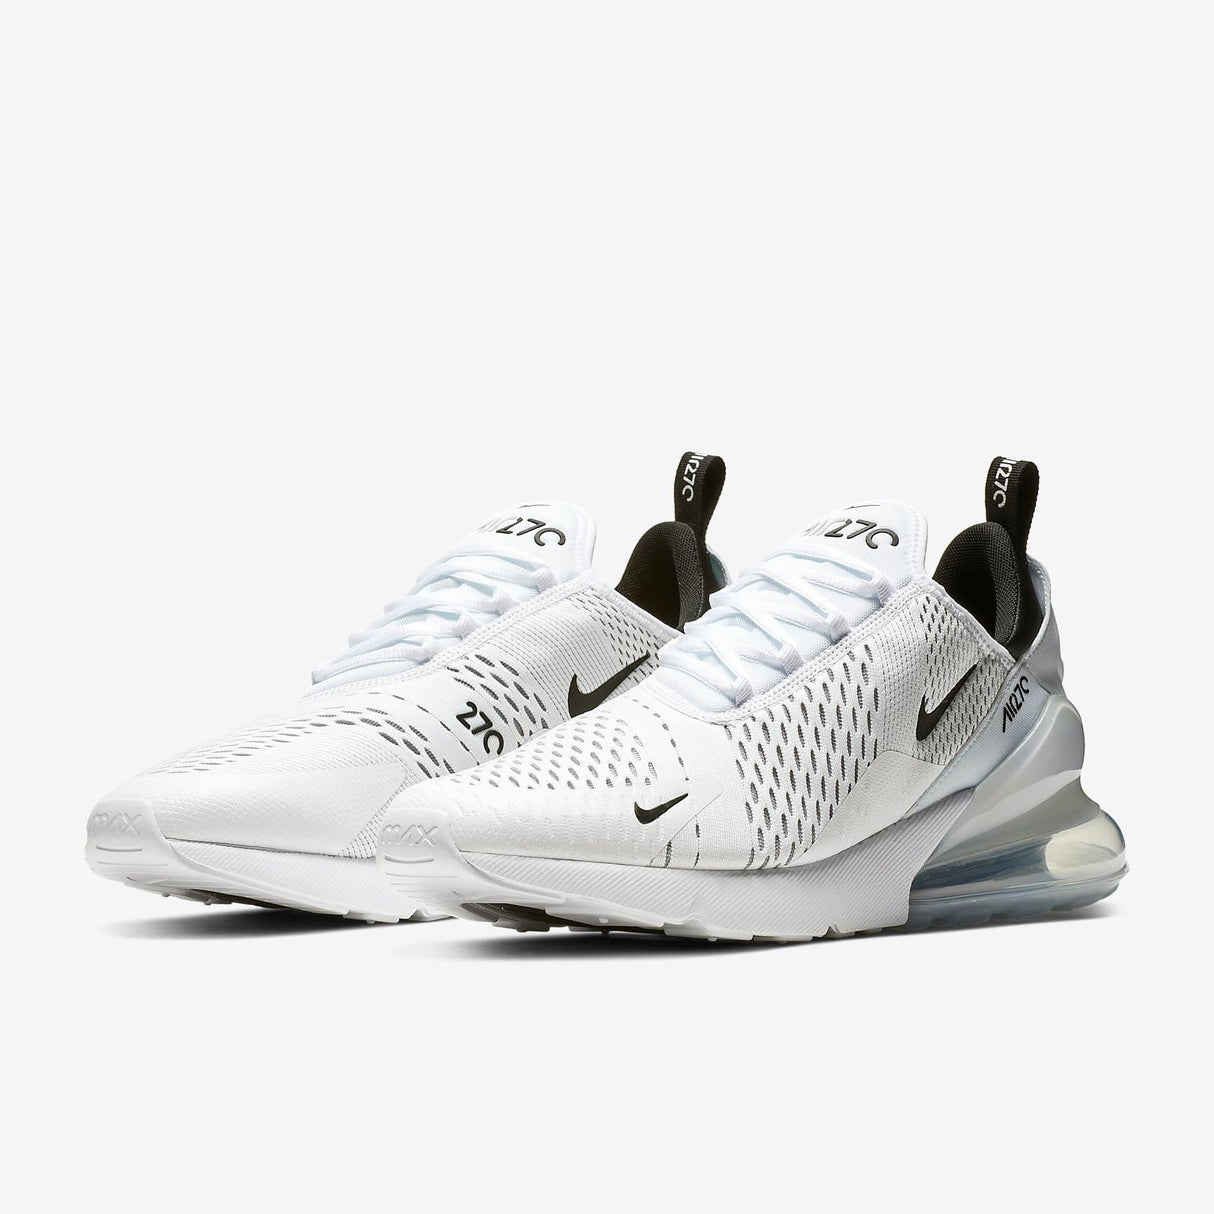 Nike Air Max 270 Trainers in White/White/Black